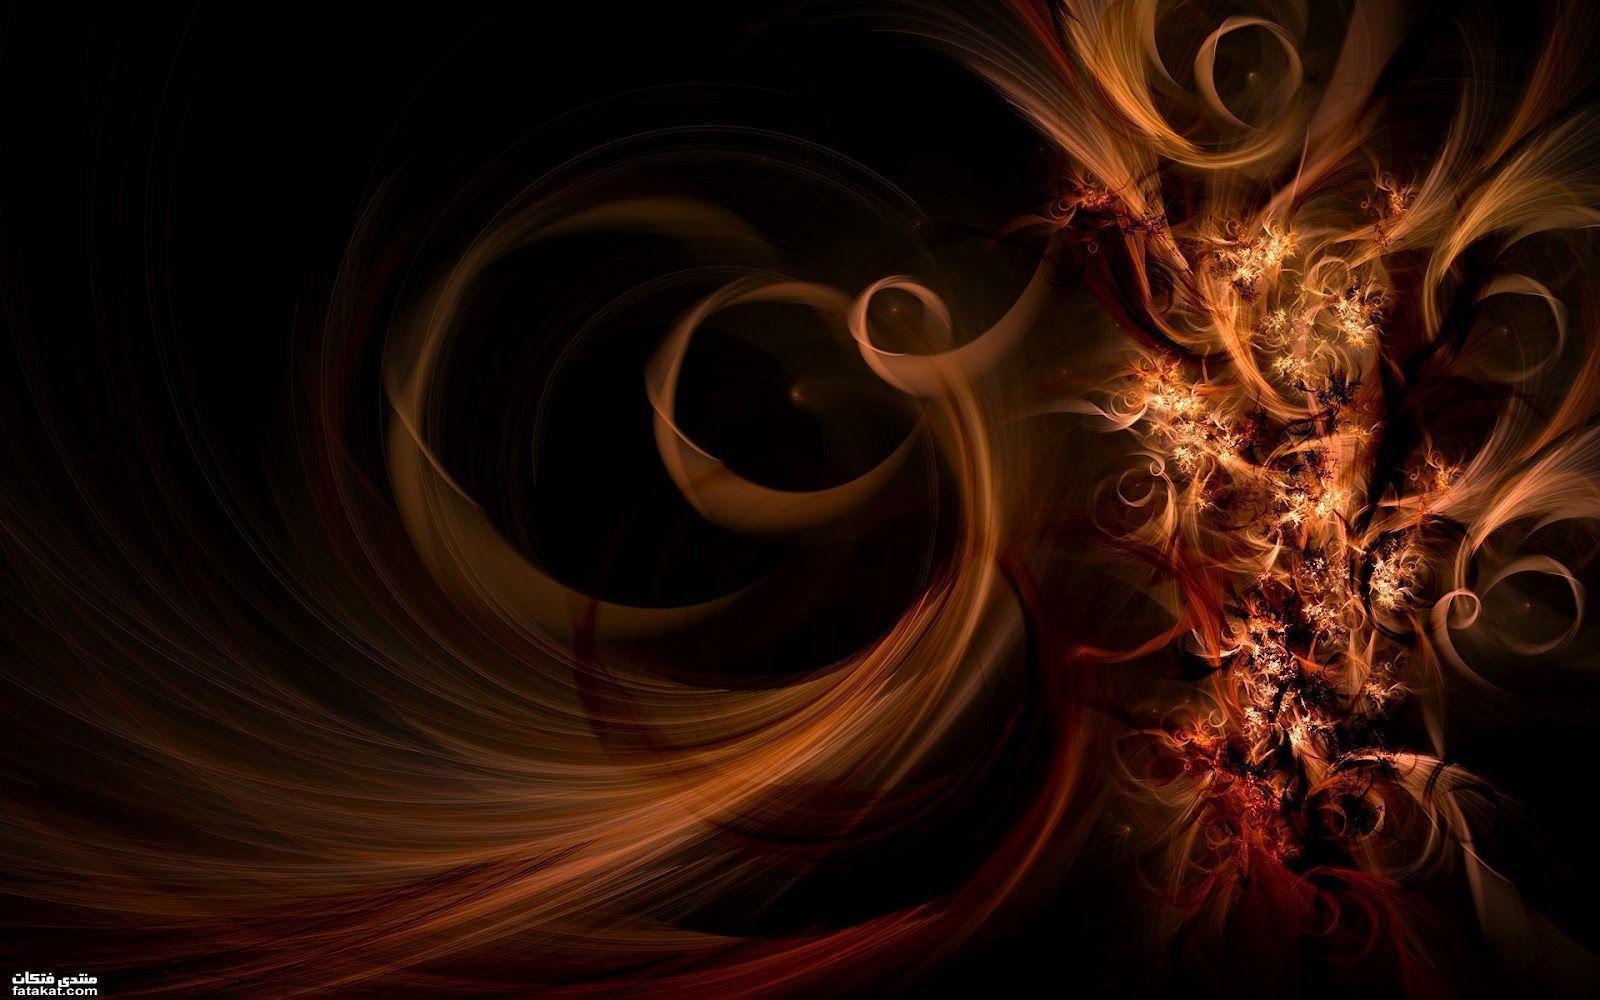 Awesome Desktop Wallpaper And Visuals FREE Download: July 2012